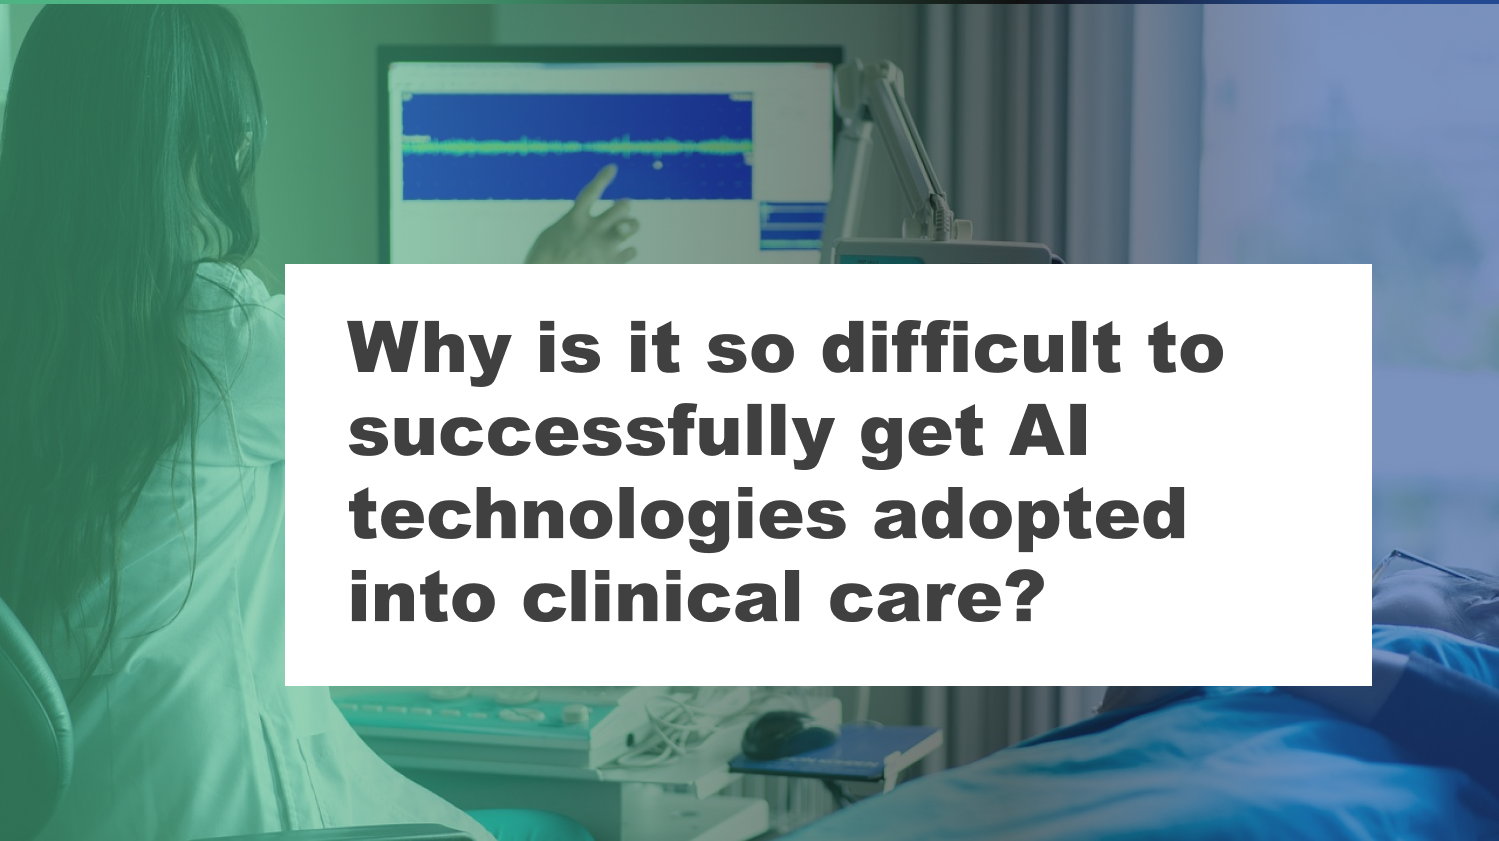 Why this is so difficult to get AI adopted into clinical care_